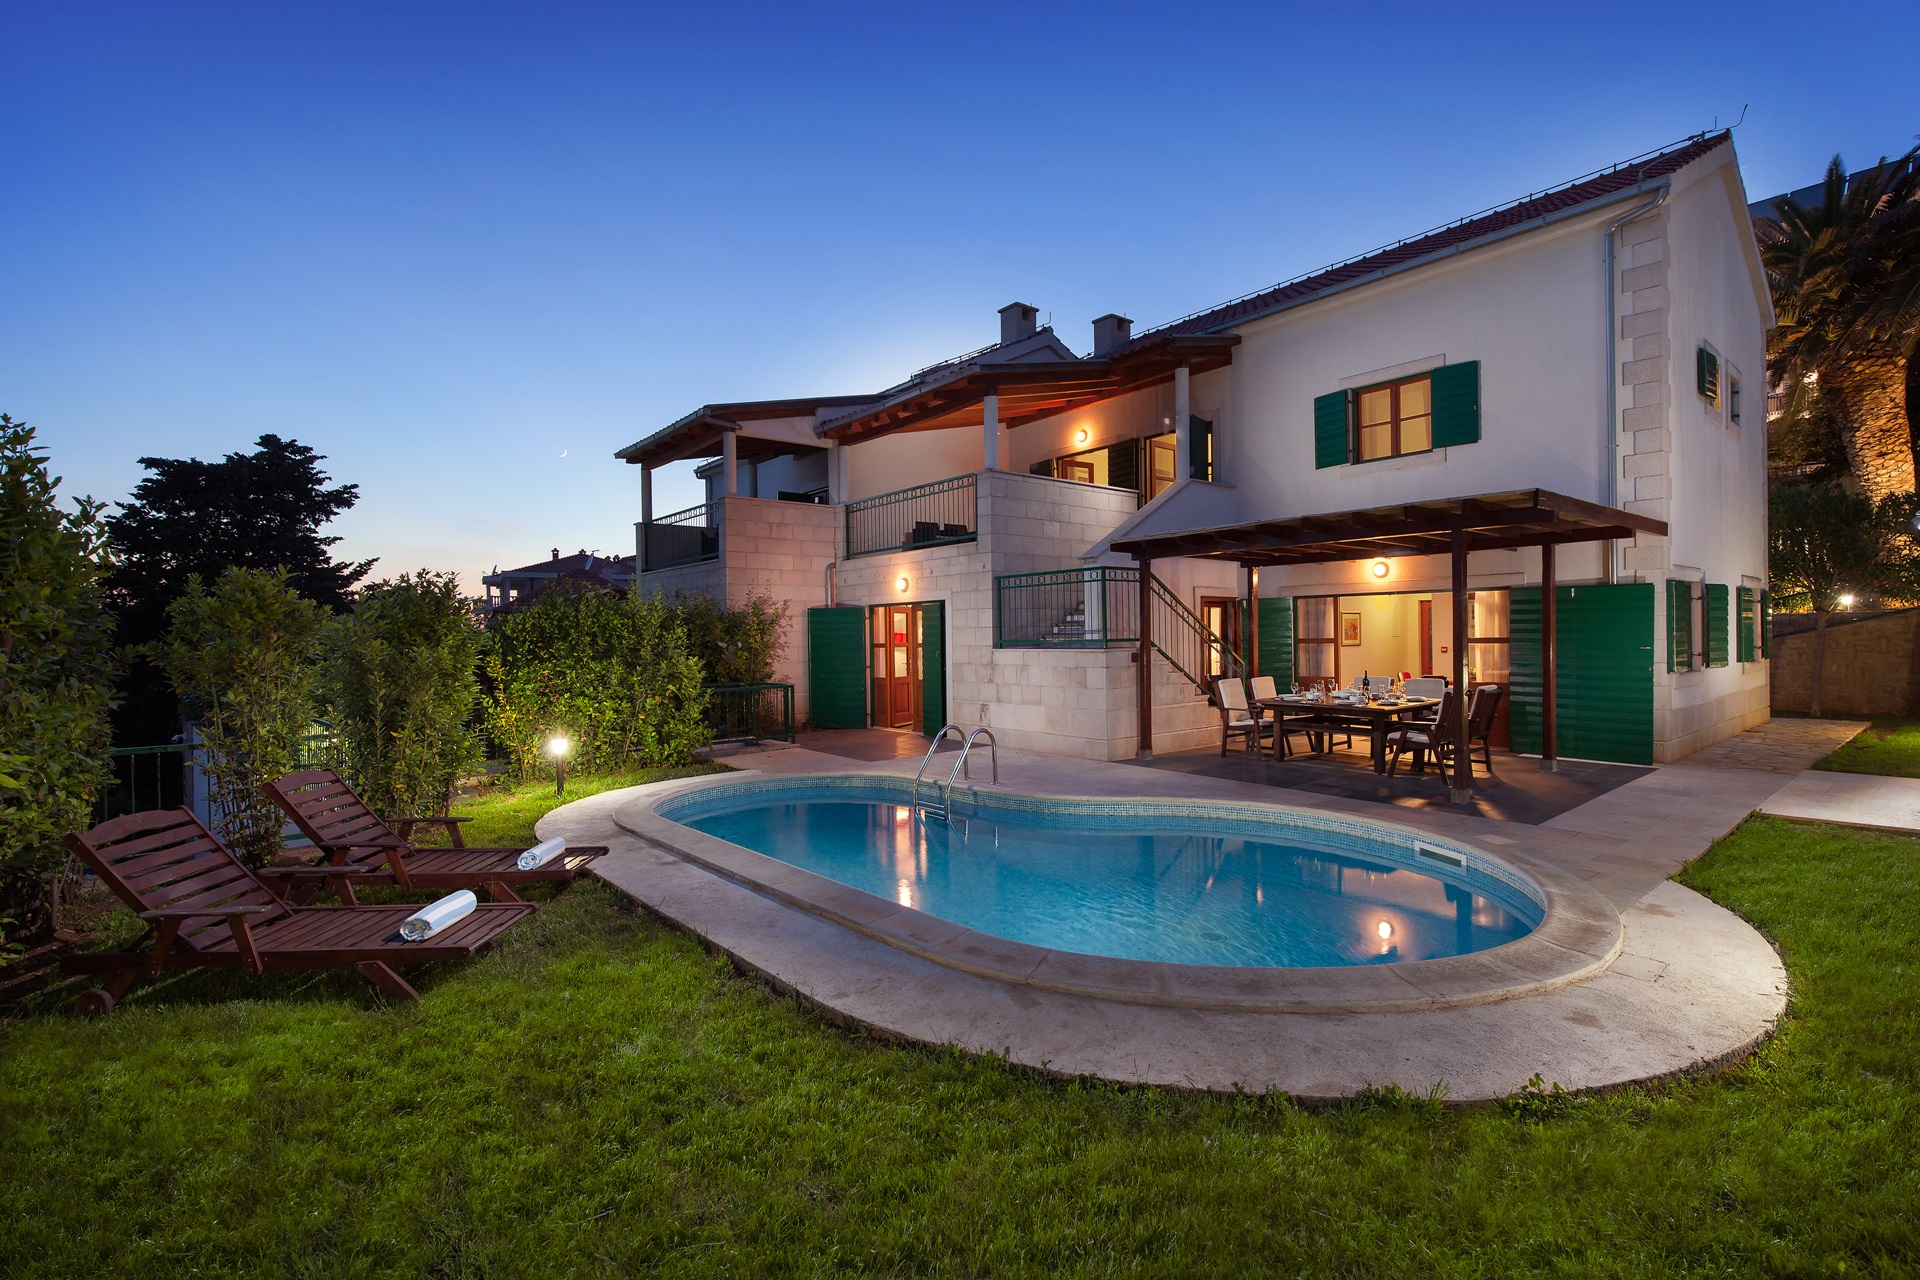 Villa with pool, 80 meters from the beach with a view